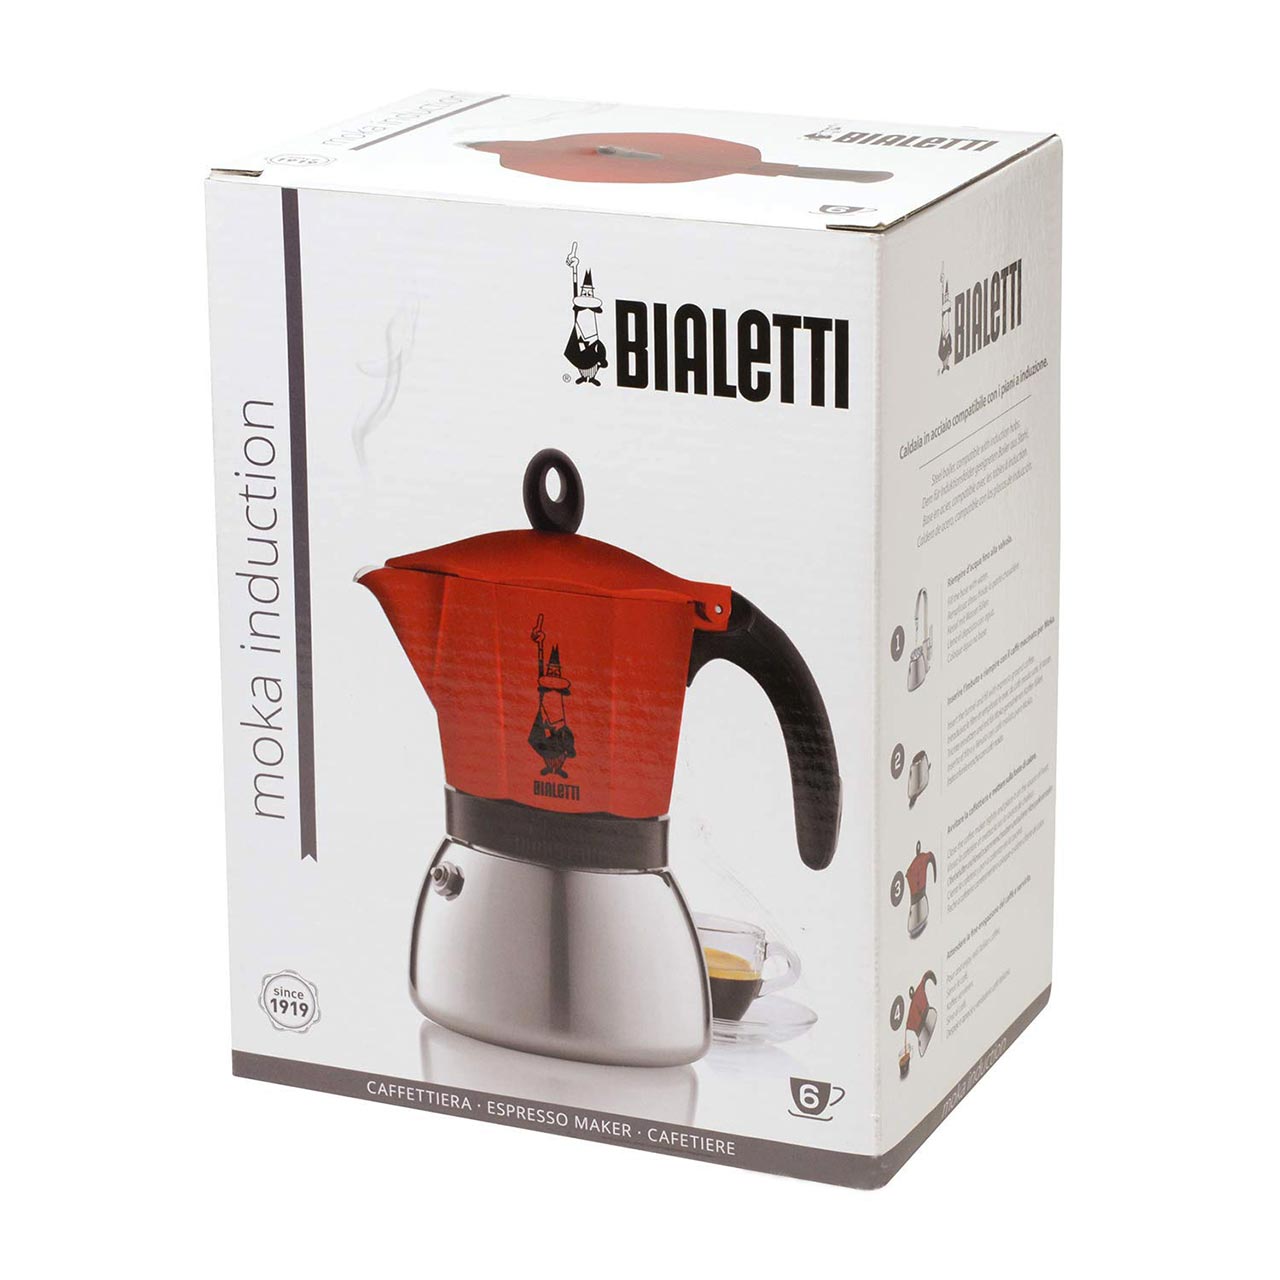 Bialetti New Moka Induction Coffee Maker Moka Pot, 6 Cups, 280 ml,  Aluminium, Red, Compatible with Induction pan and Gas stove: Italian Made